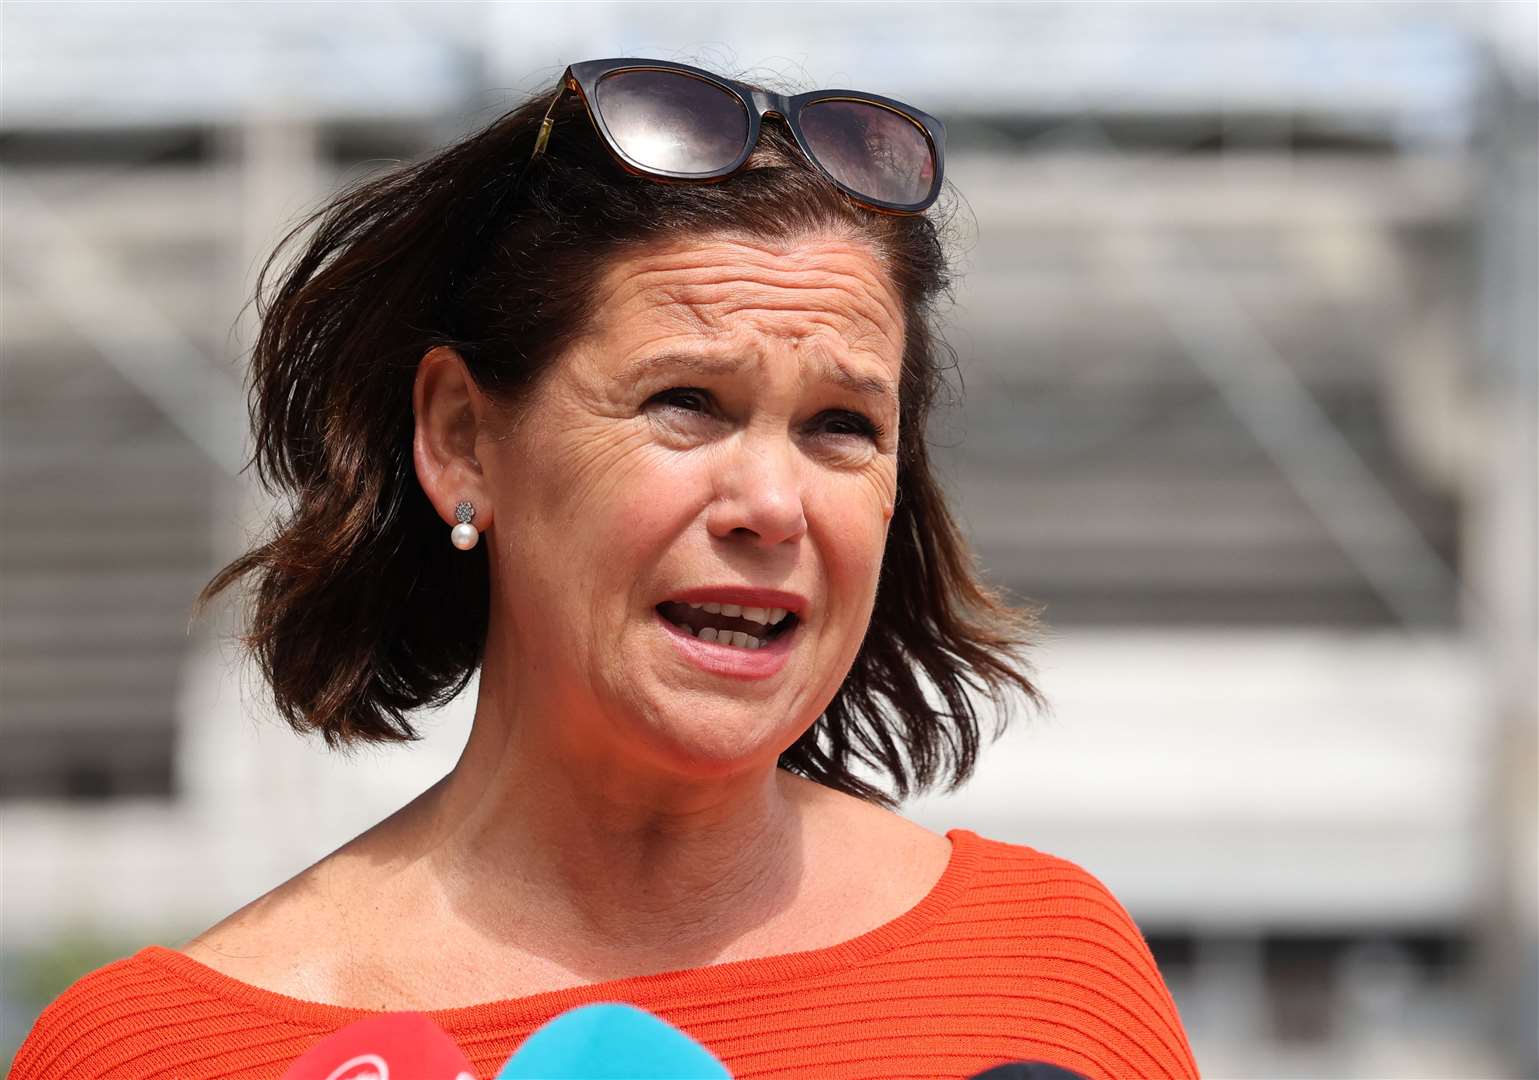 Sinn Fein president Mary Lou McDonald accused the UK Government of being ‘in cahoots’ with the DUP (Sam Boal/PA)